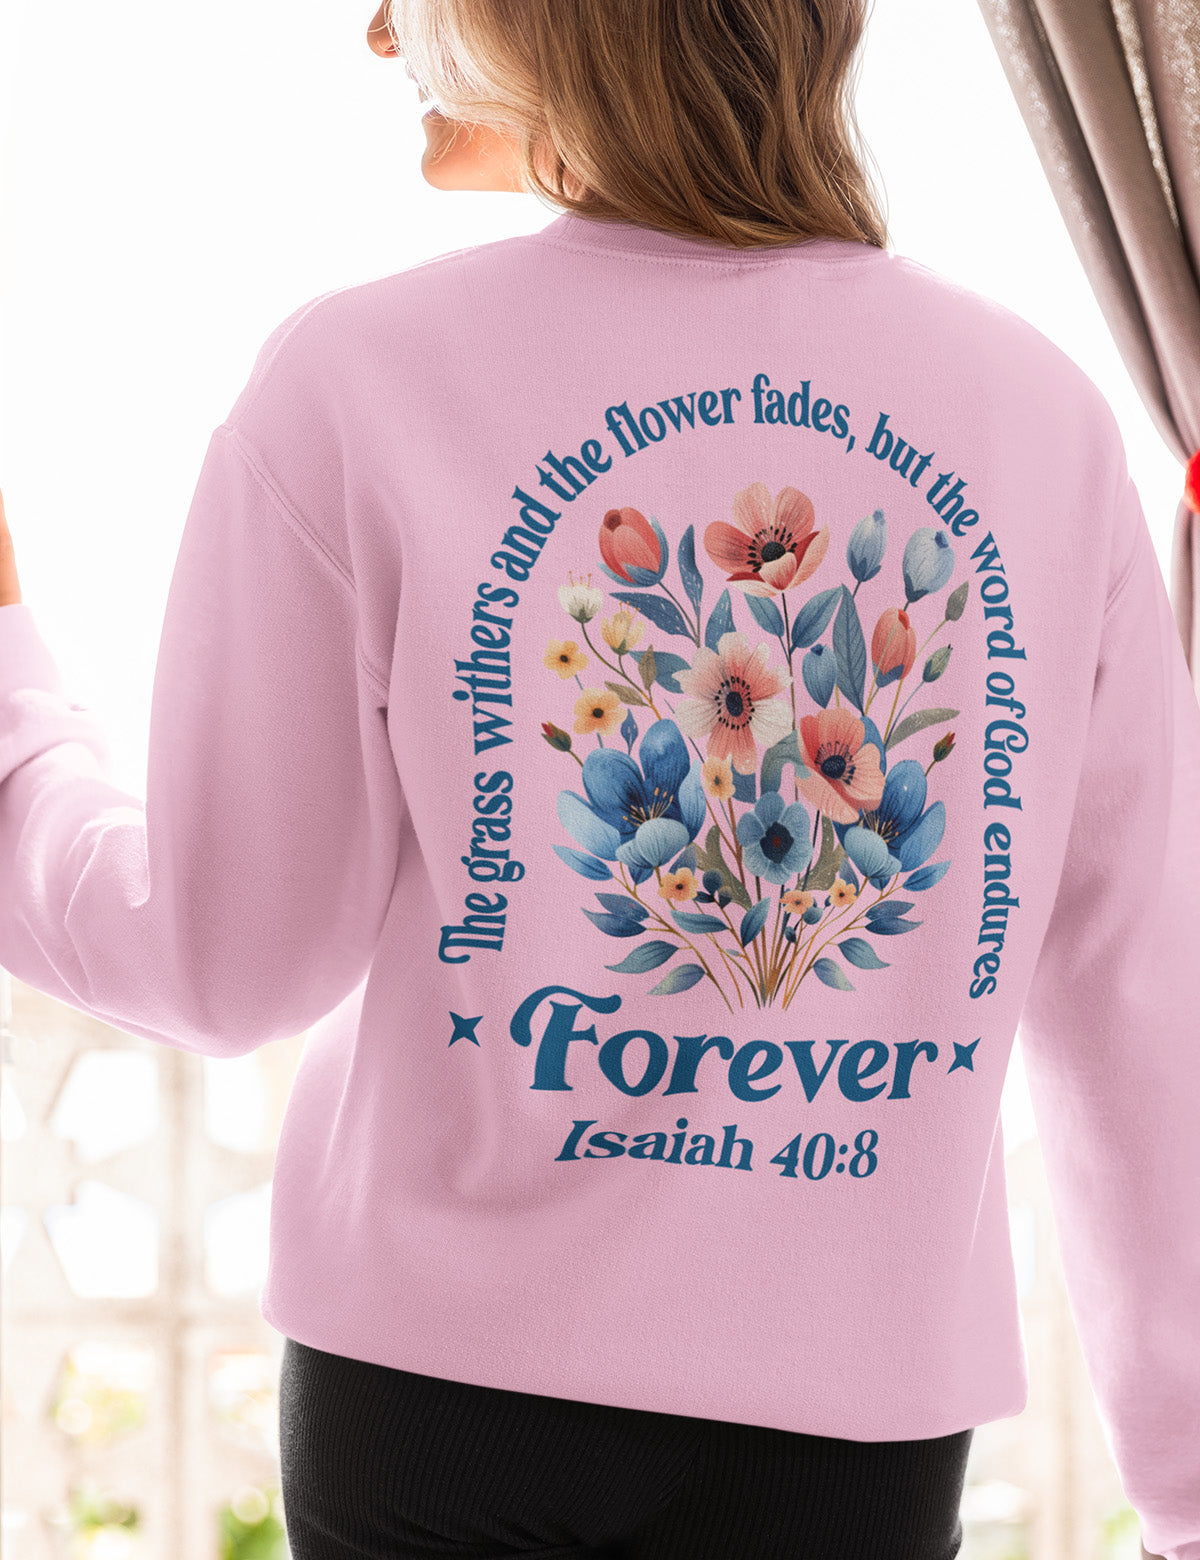 The Grass Withers and The Flower Fades, But The Word of God Endures Forever Christian Sweatshirts